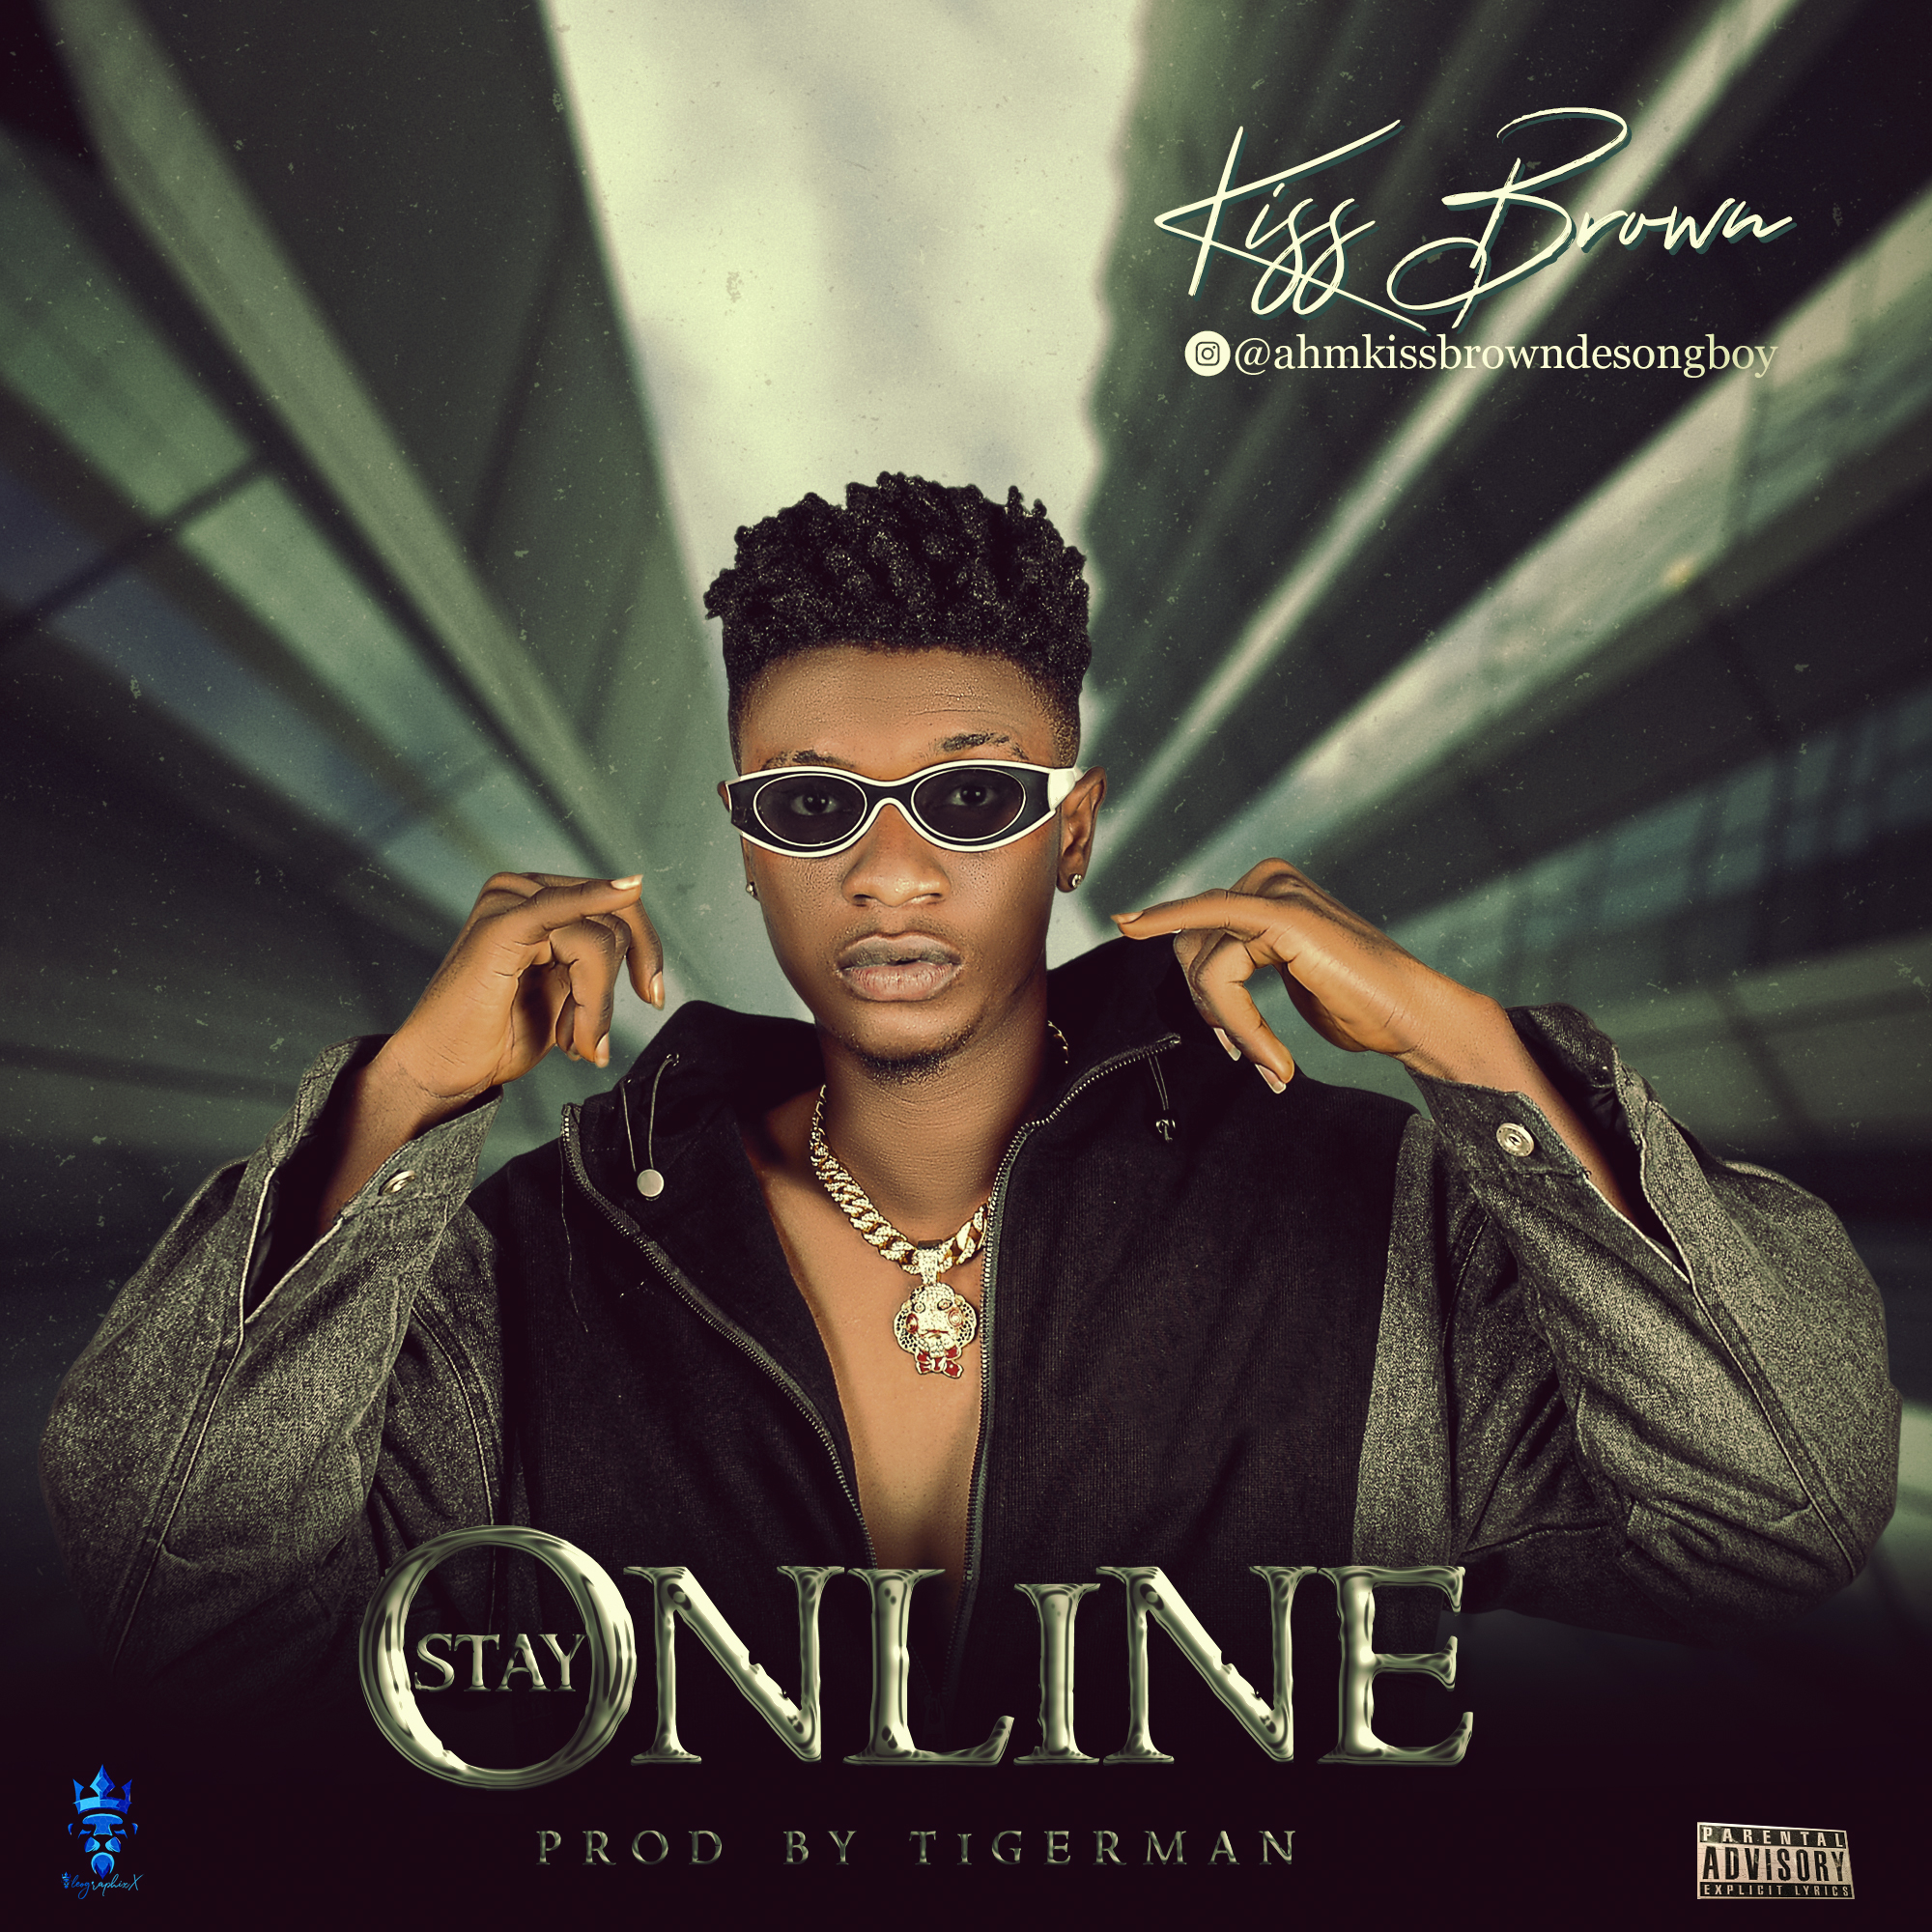 Music: Kiss brown - Stay Online